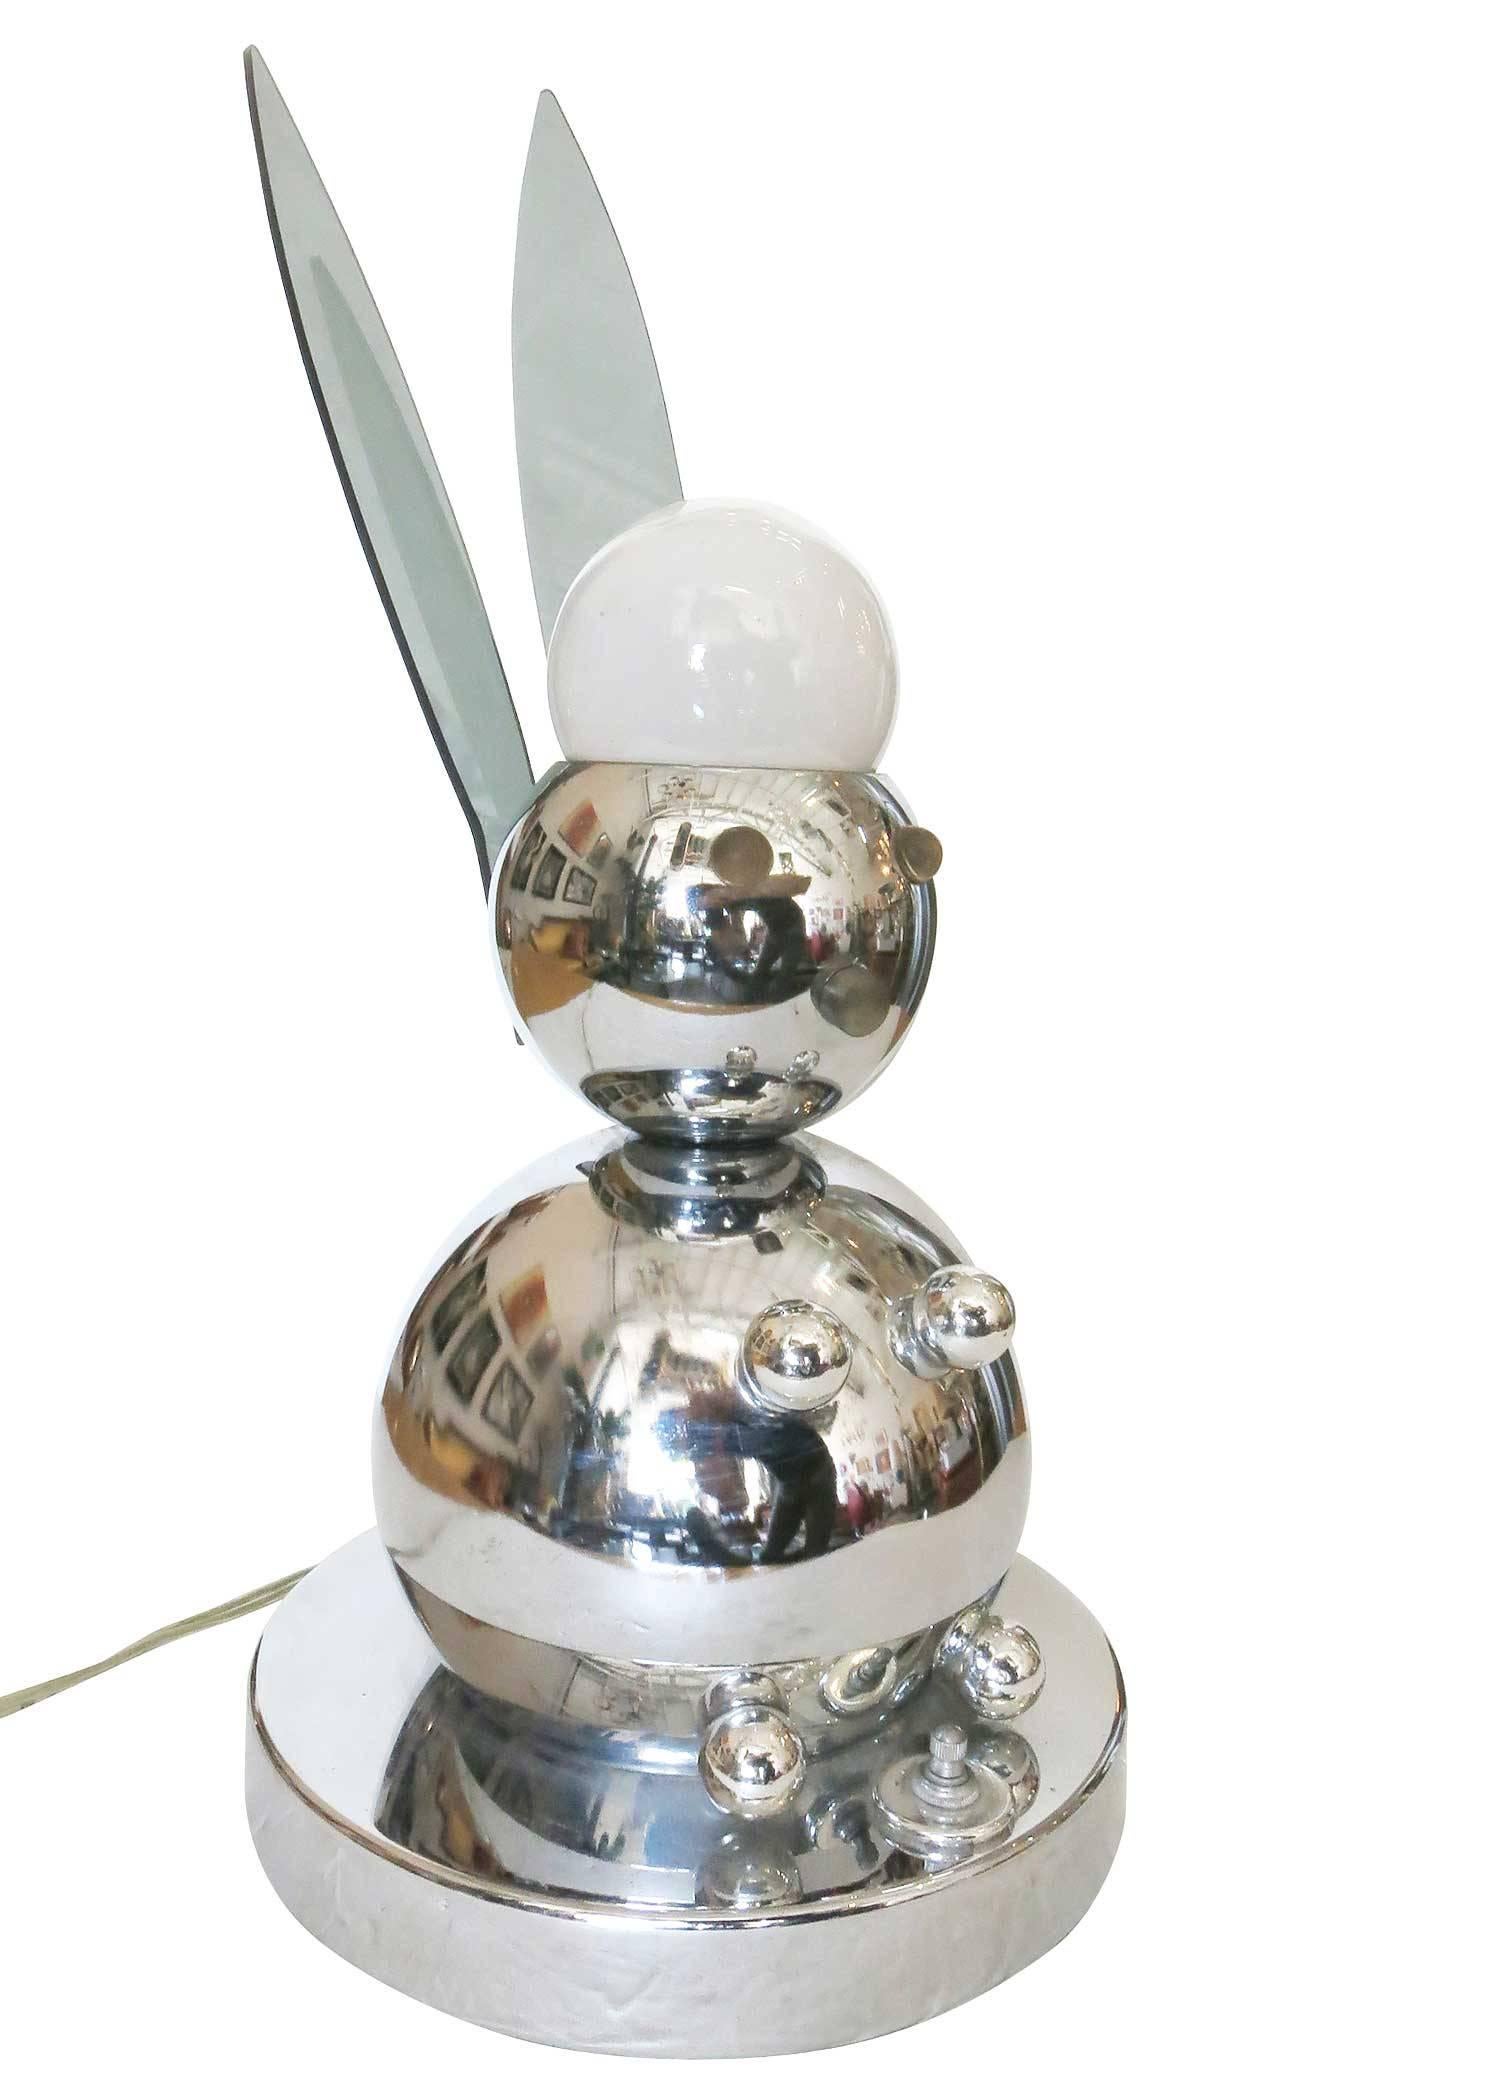 Postmodern chrome bunny rabbit lamp constructed entirely of chromed steel and Lucite accent pieces. The rabbit is made of a series of different sized chromed balls with Lucite ears and light up eyes which sit on a chrome base.